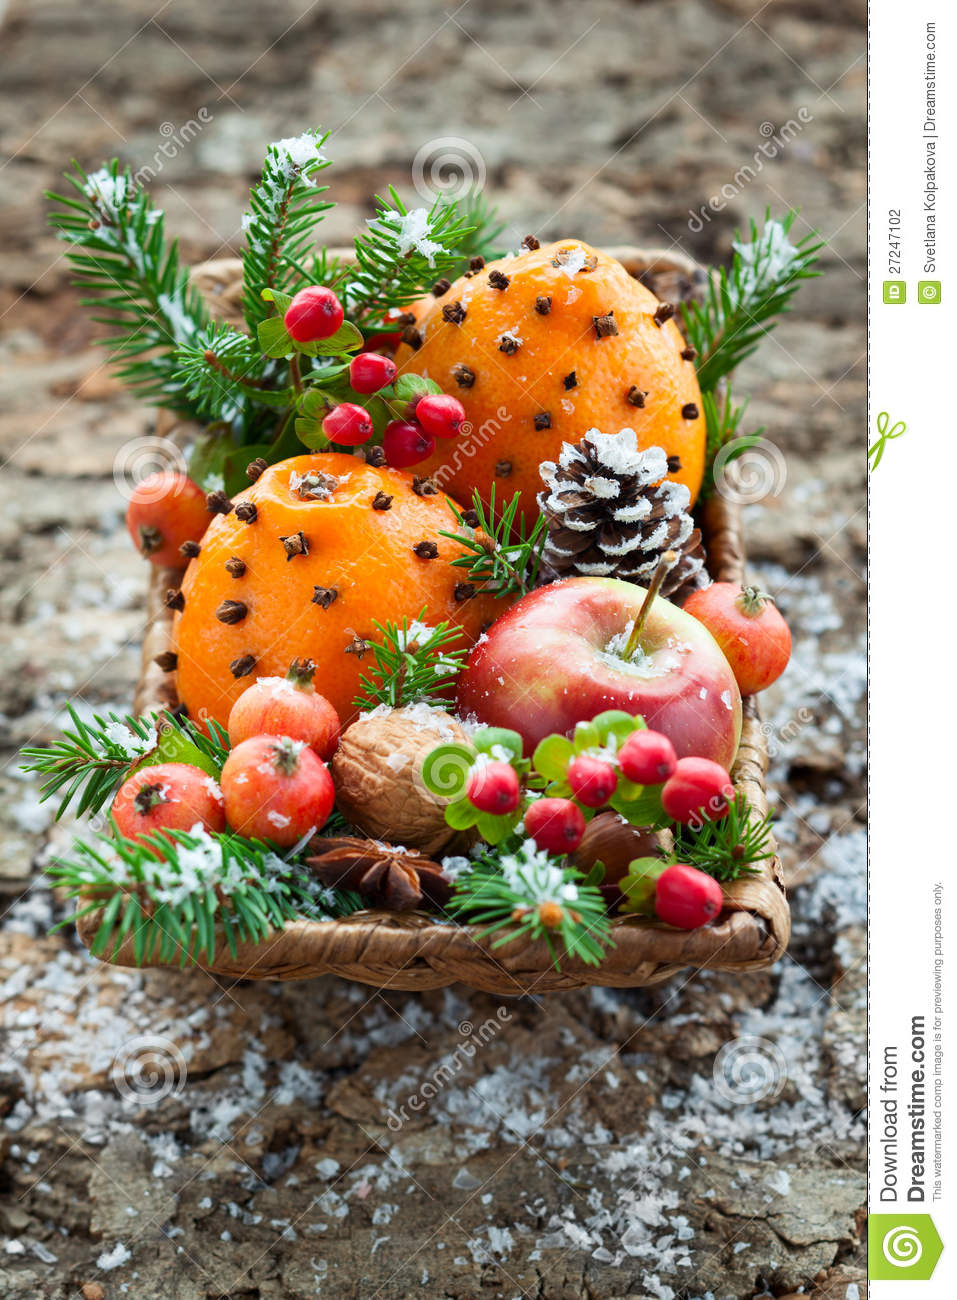 Christmas Basket With Fruits Berries And Nuts 